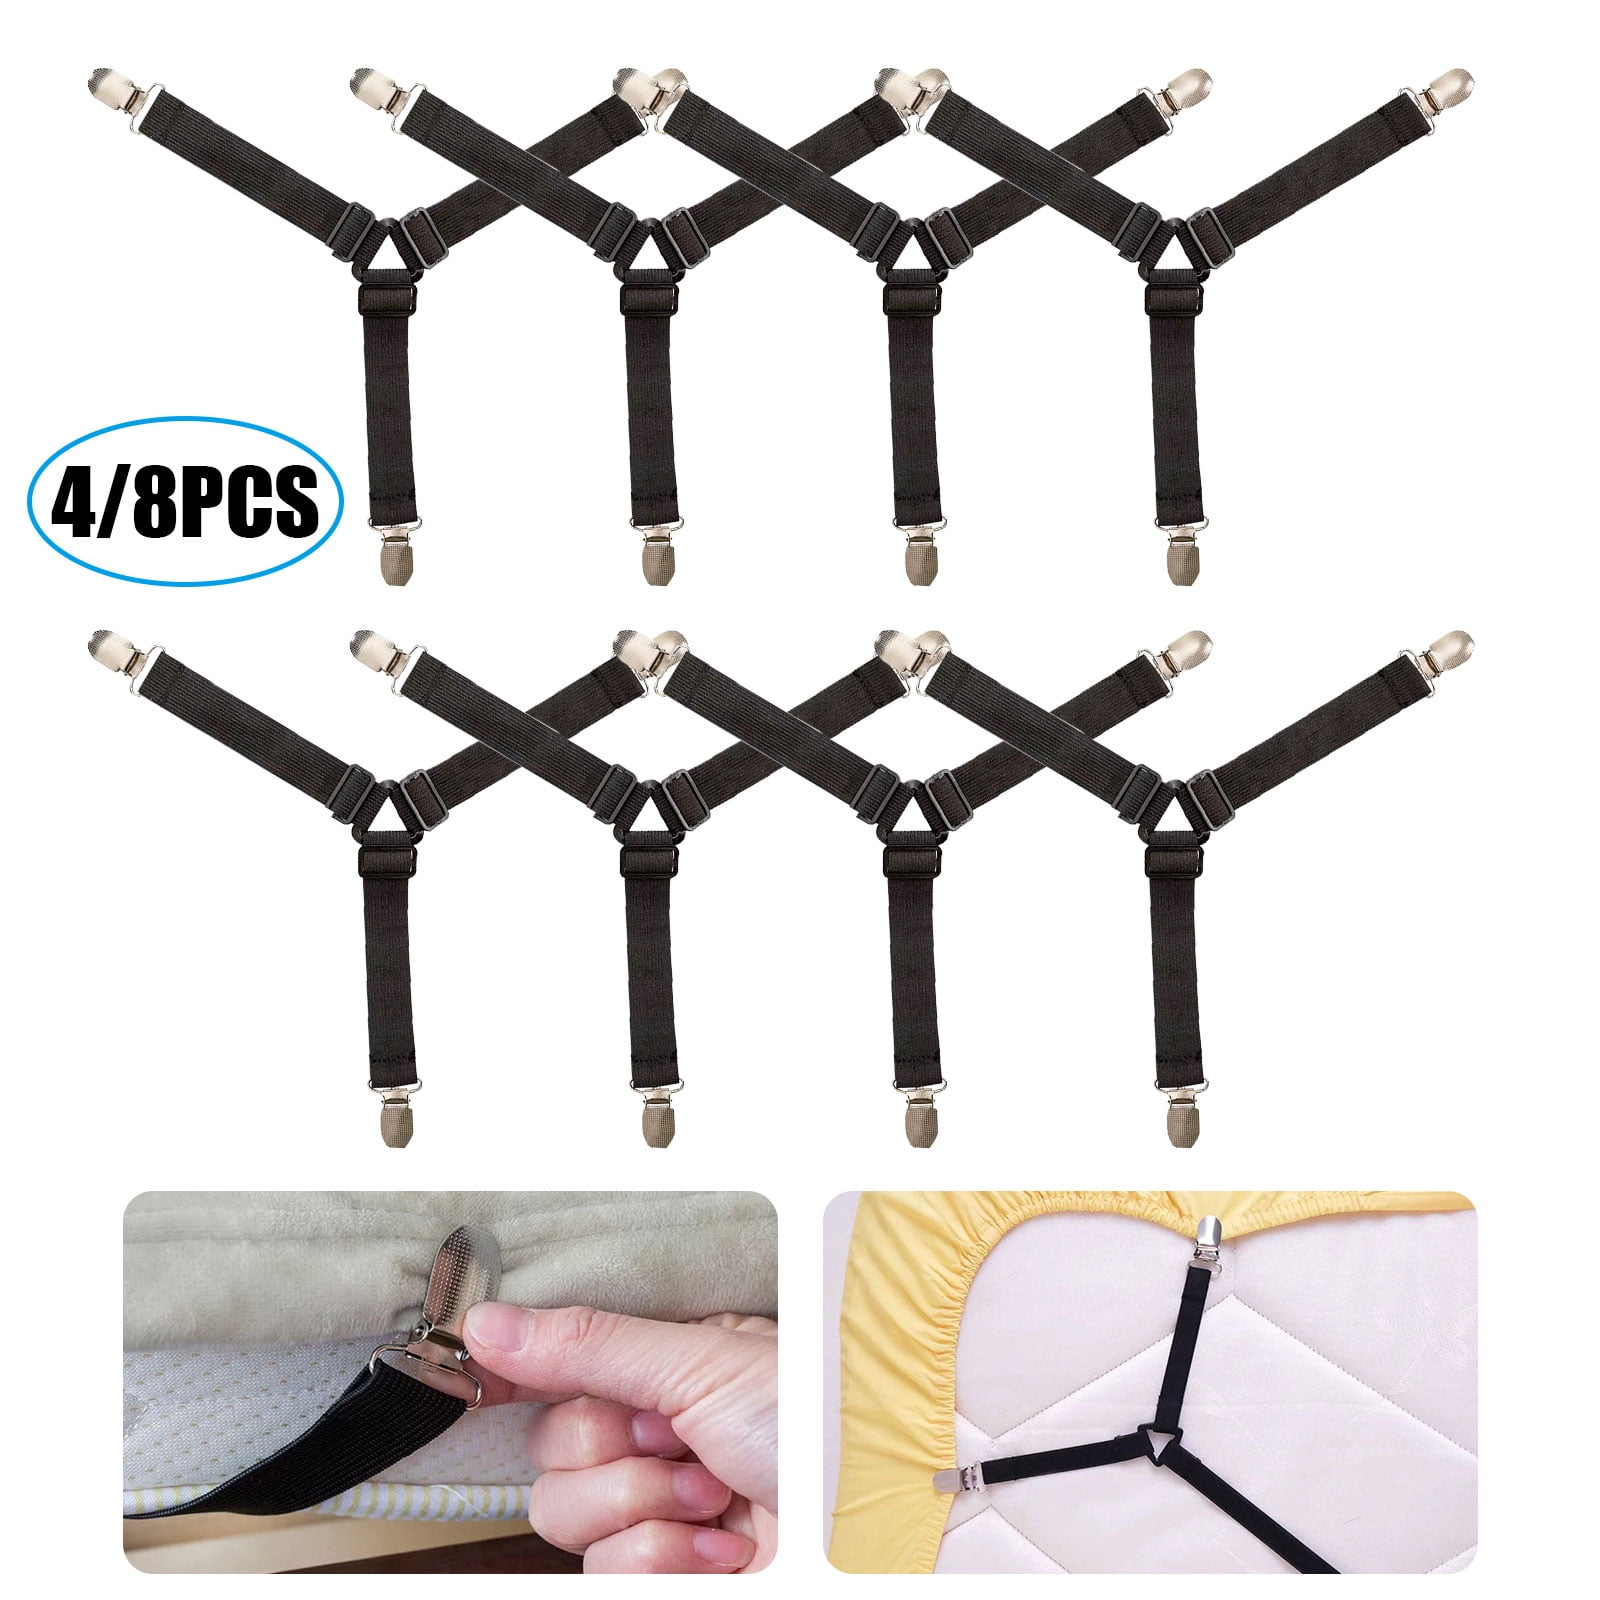 4 Pcs Triangle Bed Sheet Holders Straps Fasteners Adjustable Bed Clip Grippers Mattress Corner Strap